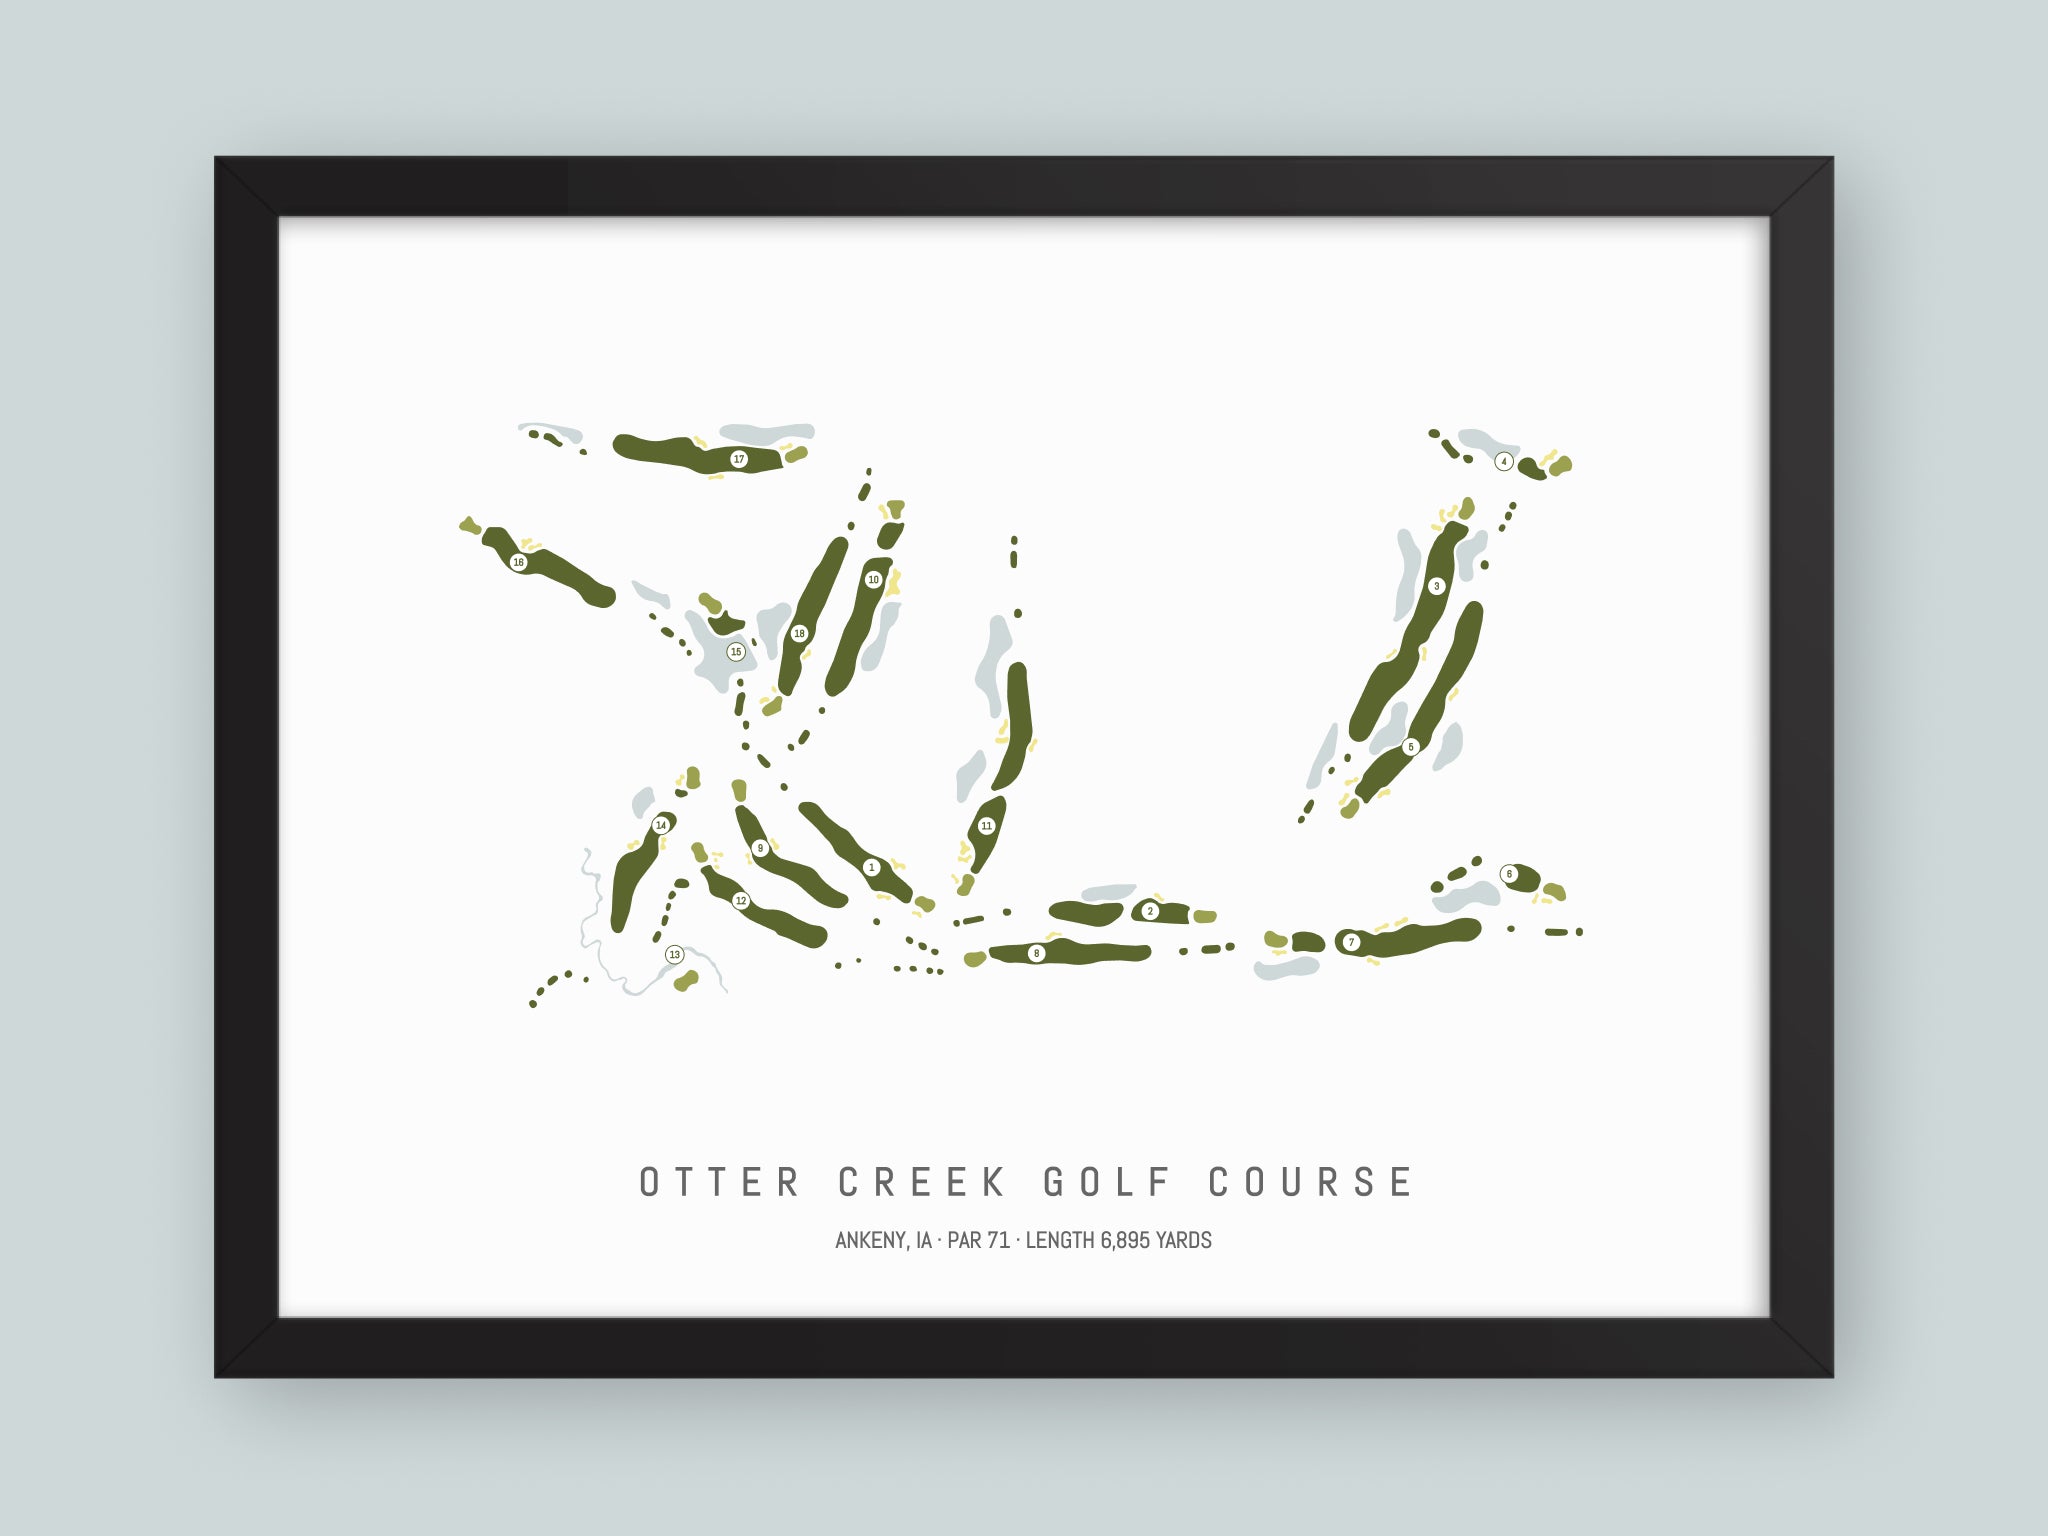 Otter-Creek-Golf-Course-IA--Black-Frame-24x18-With-Hole-Numbers